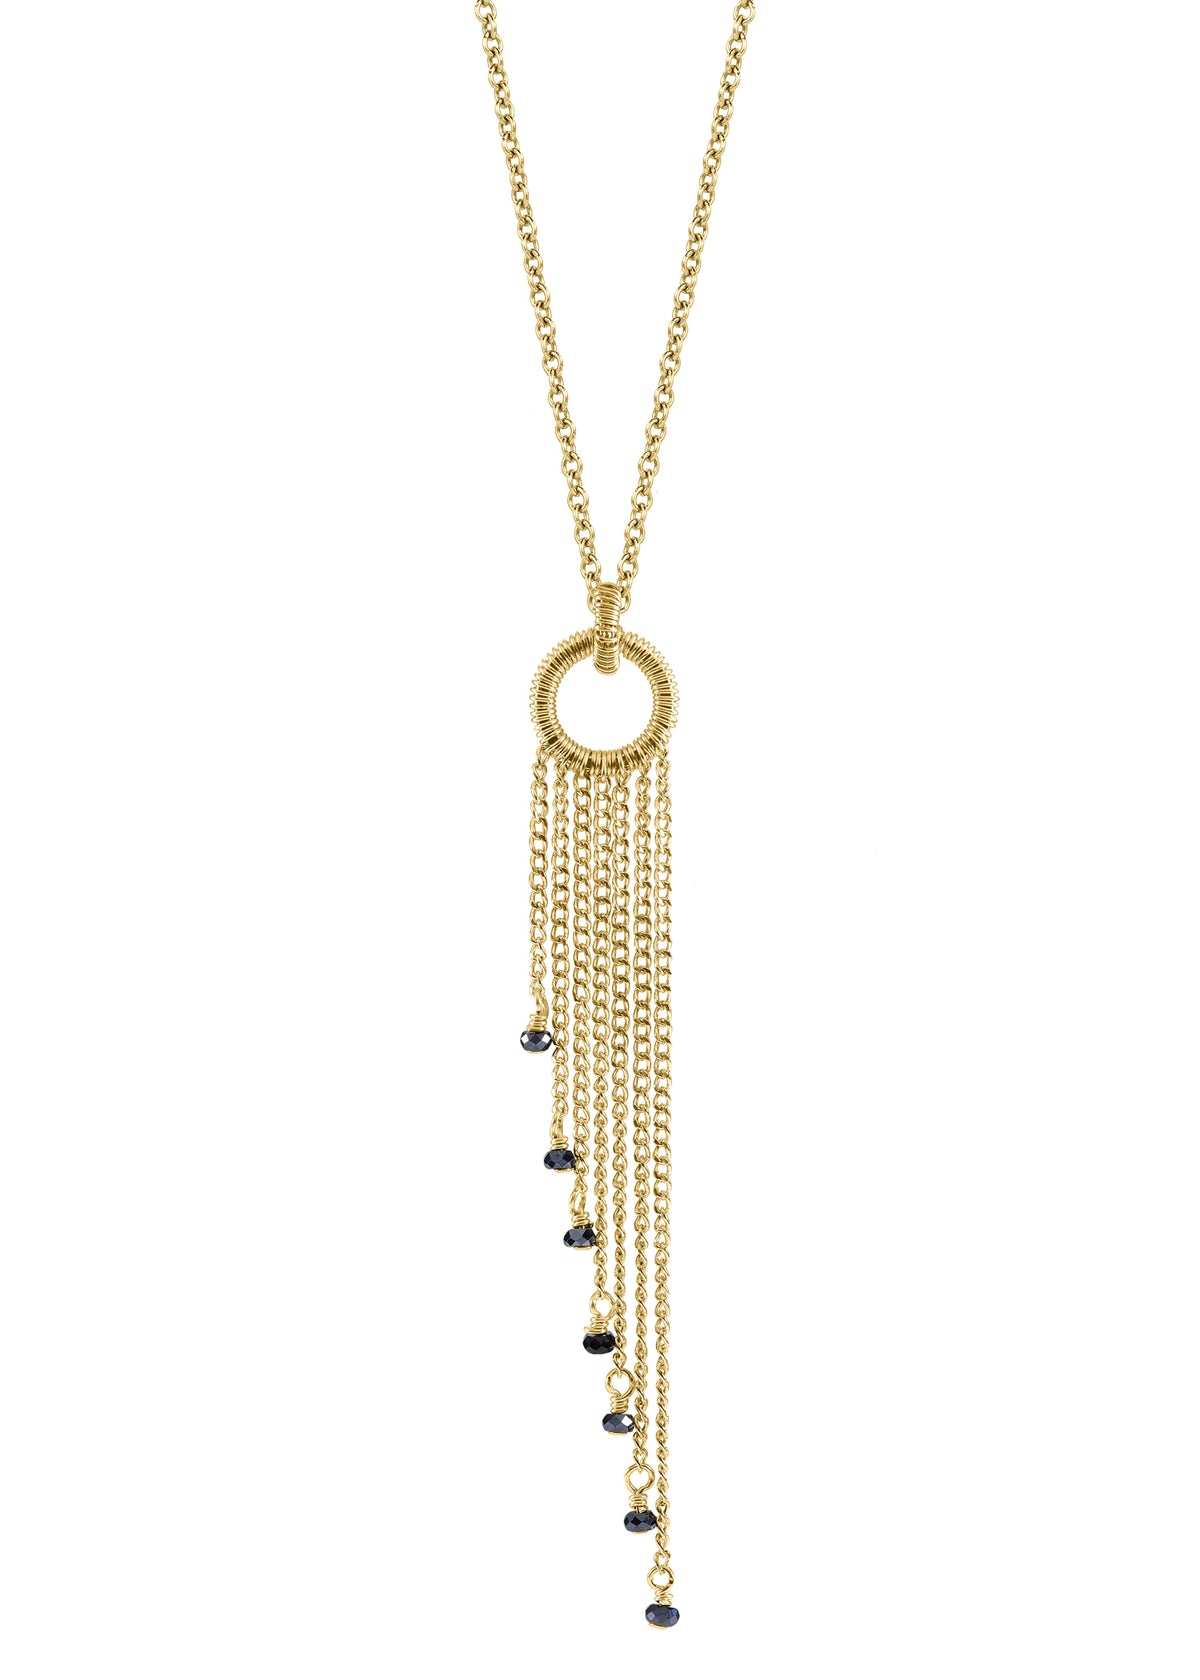 Black spinel 14k gold fill Chain measures 17&quot; in length Pendant measures 2-3/8&quot; in length and 5/16&quot; in width across the frame Handmade in our Los Angeles studio